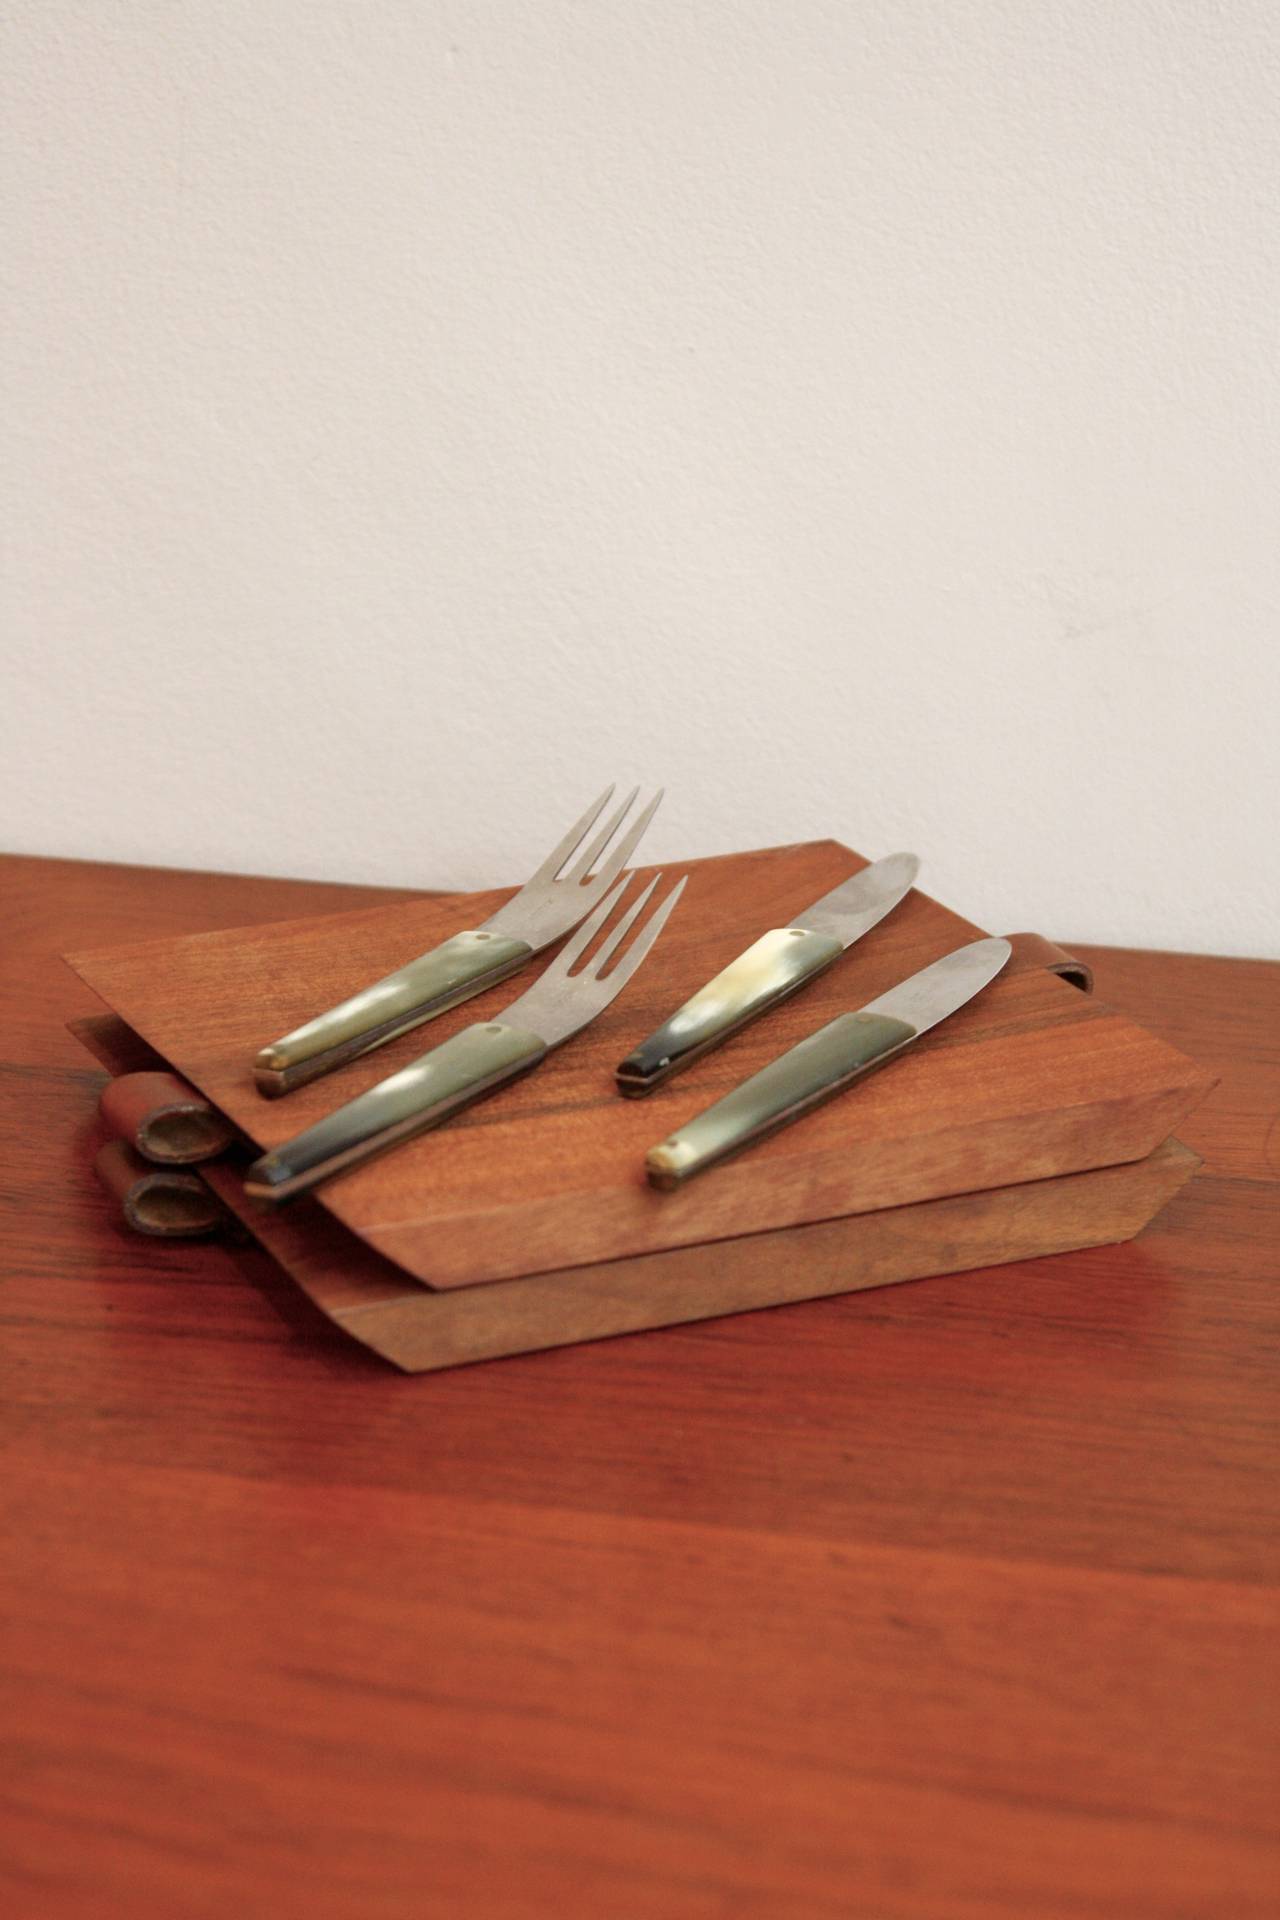 Pair of walnut boards with steel and horn cutlery. Lovely pair of classic Auböck  sculptural and utilitarian pieces for life.